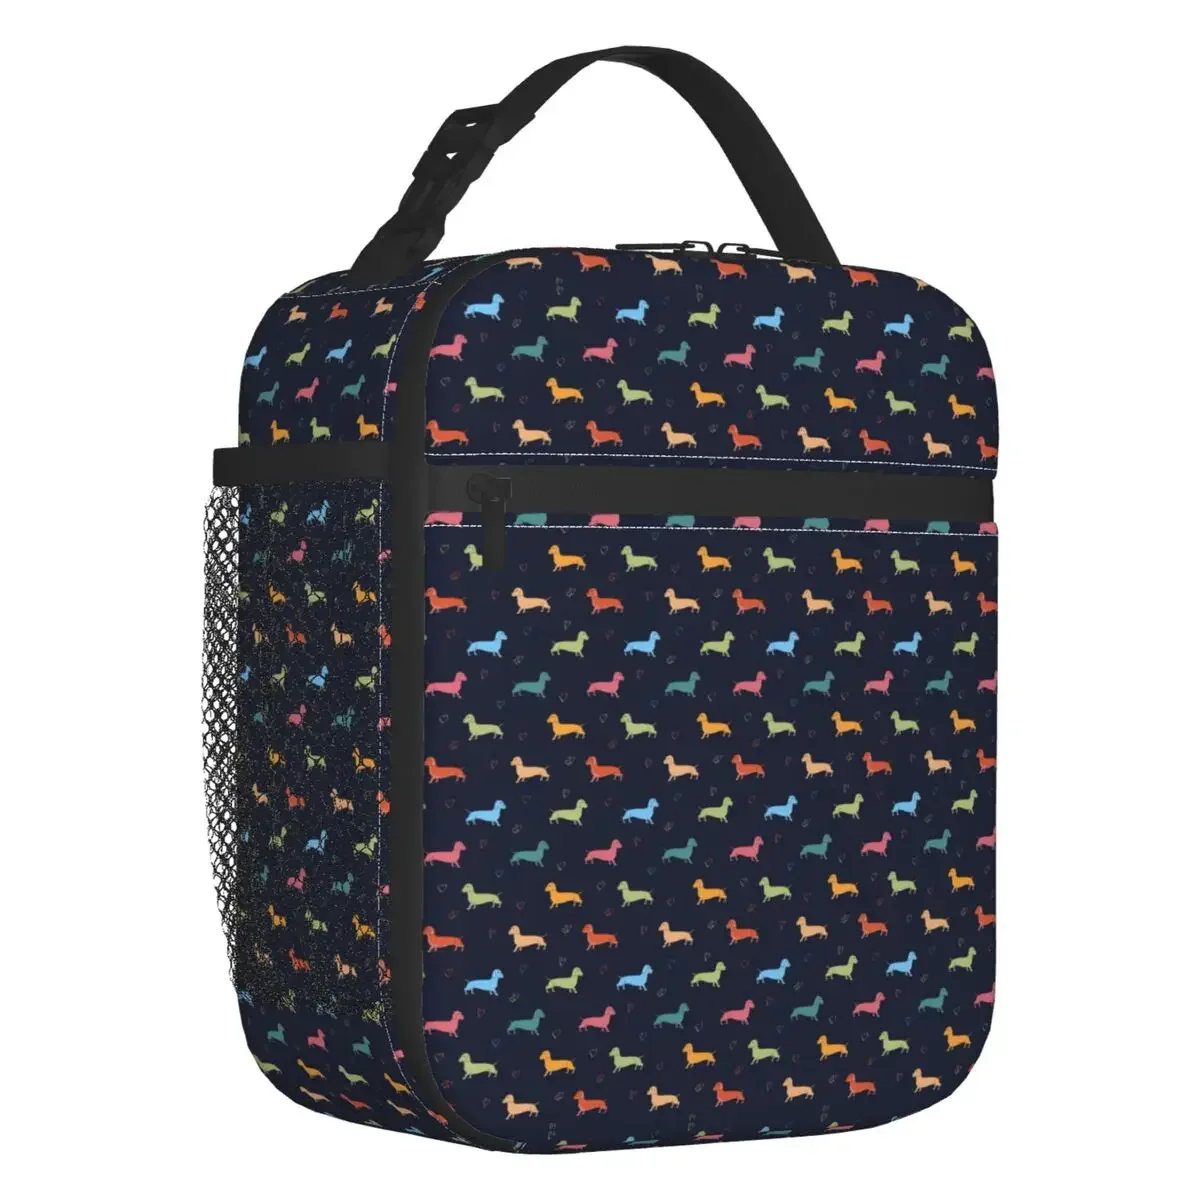 

Multicolour Sausage Dog And Hearts Insulated Lunch Bag Dachshund Badger Puppy Cooler Thermal Lunch Tote Office Work School